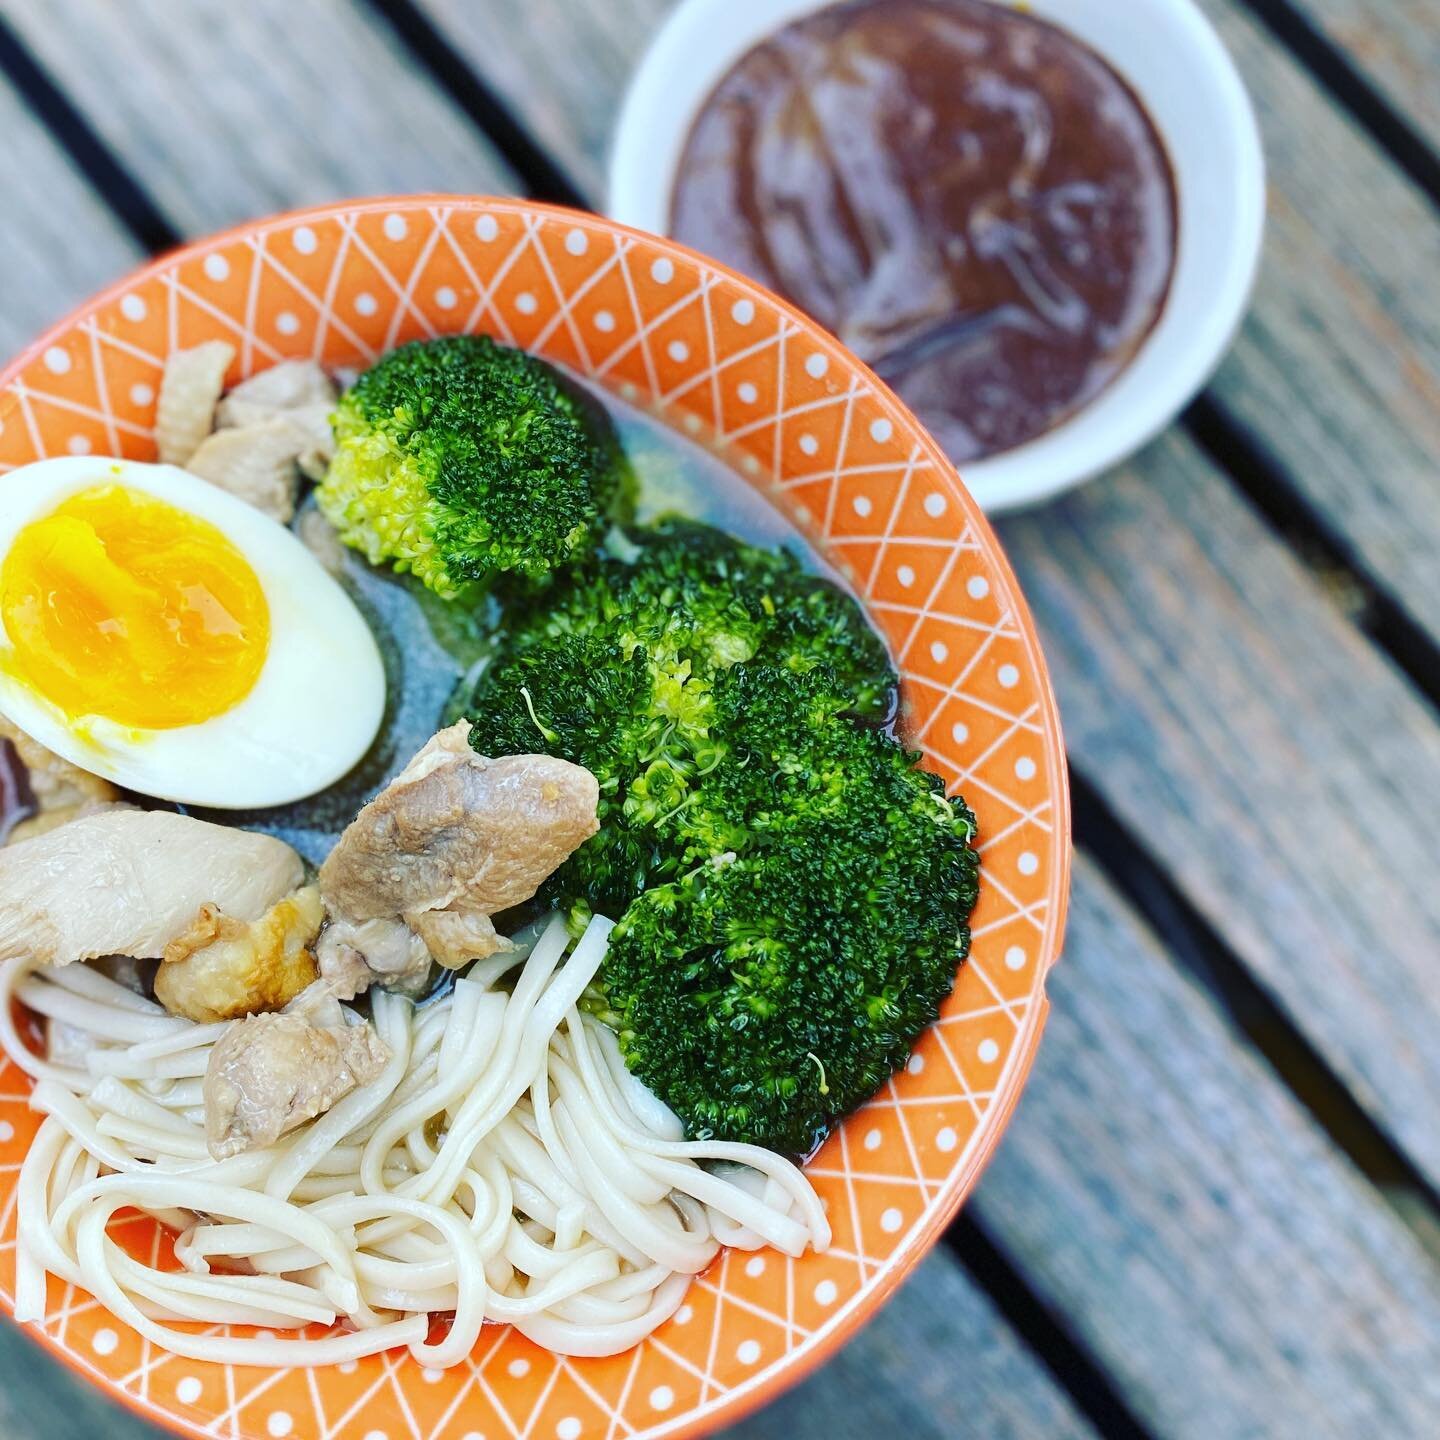 Ramen + AvoChoco Pudding.  We did it Girl Scouts! Another great class cooking up whole food based, nutrient dense recipes! 🍜🥑 #girlscouts #cookingwithkids #virtualgirlscouts #virtualcookingclass ##chefali #wholefoodcooking #wholefood